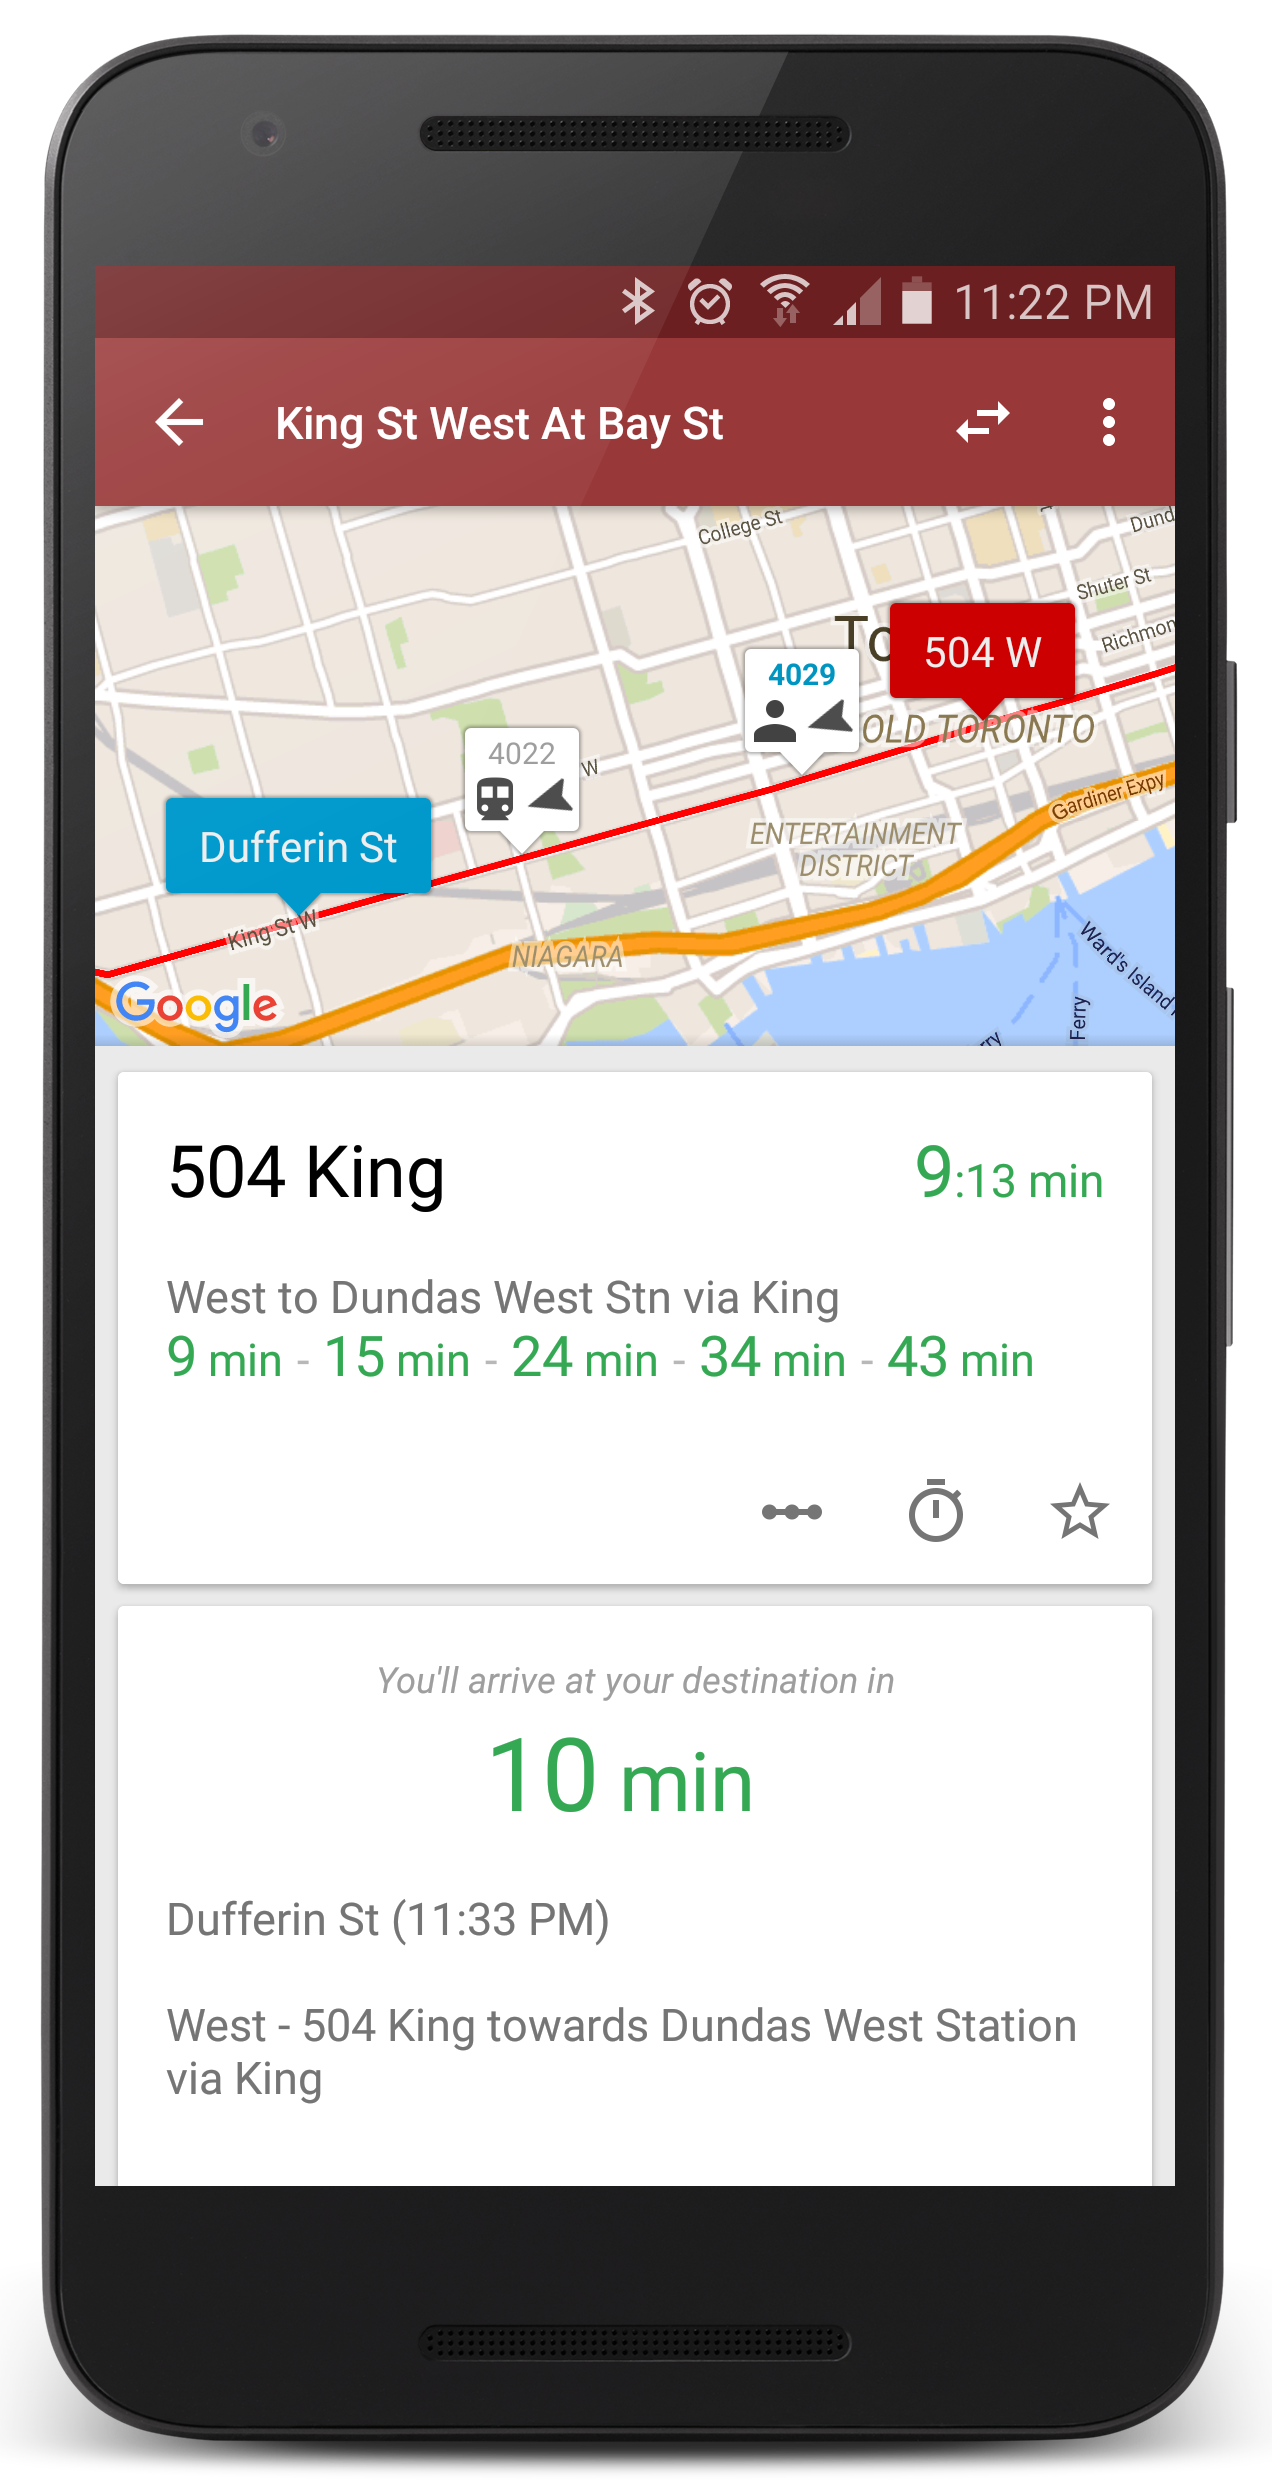 View bus and streetcars arrival times in real-time on a map.